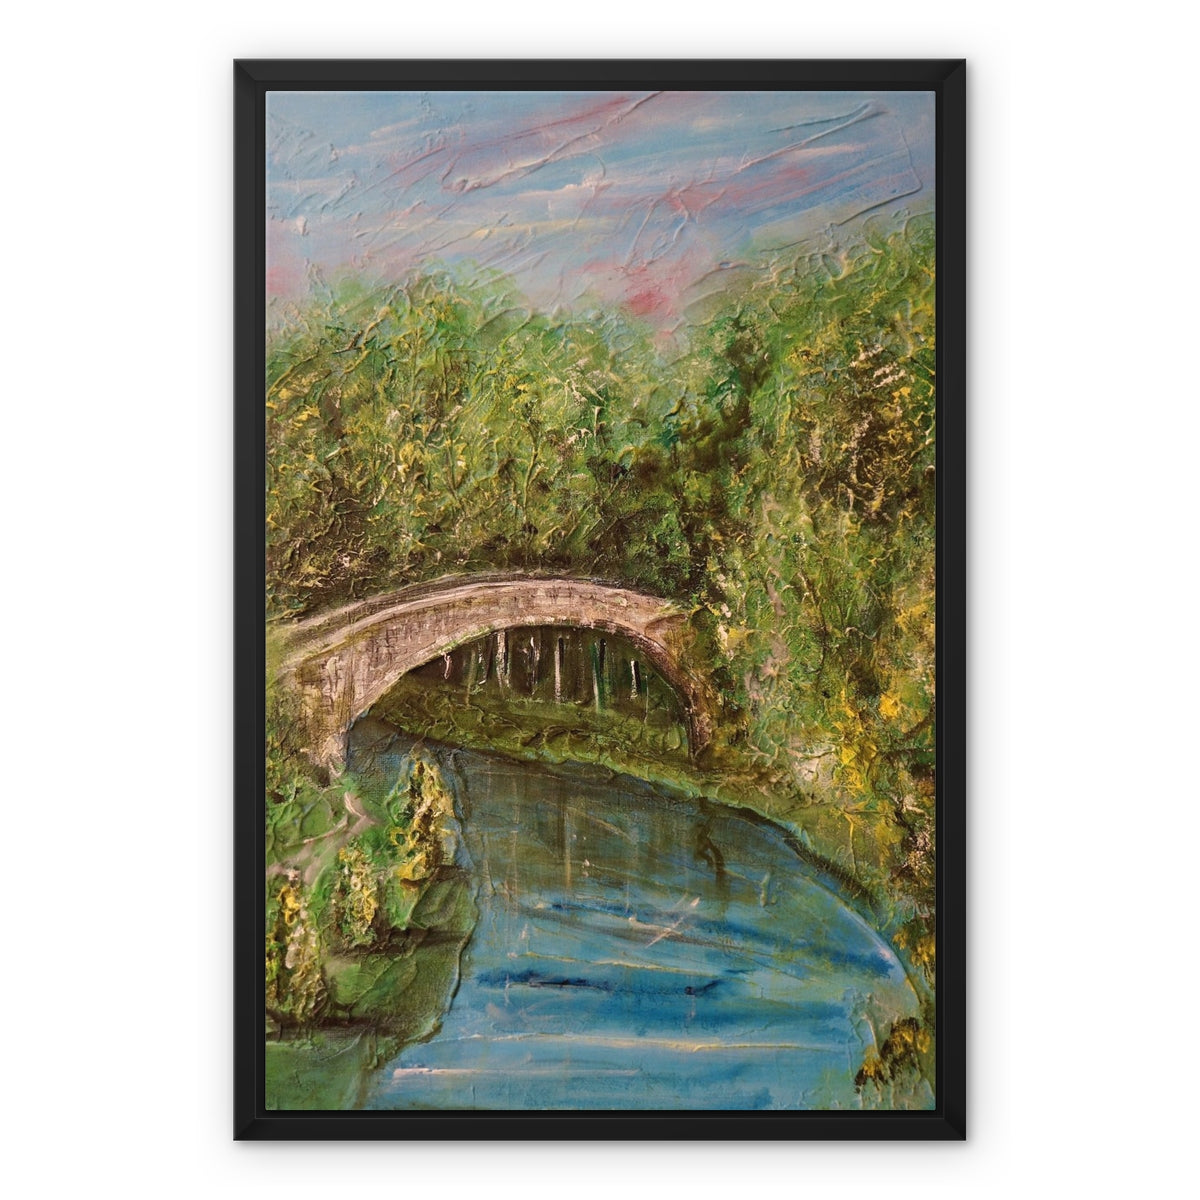 The Brig O Doon Painting | Framed Canvas From Scotland-Floating Framed Canvas Prints-Historic & Iconic Scotland Art Gallery-18"x24"-Paintings, Prints, Homeware, Art Gifts From Scotland By Scottish Artist Kevin Hunter